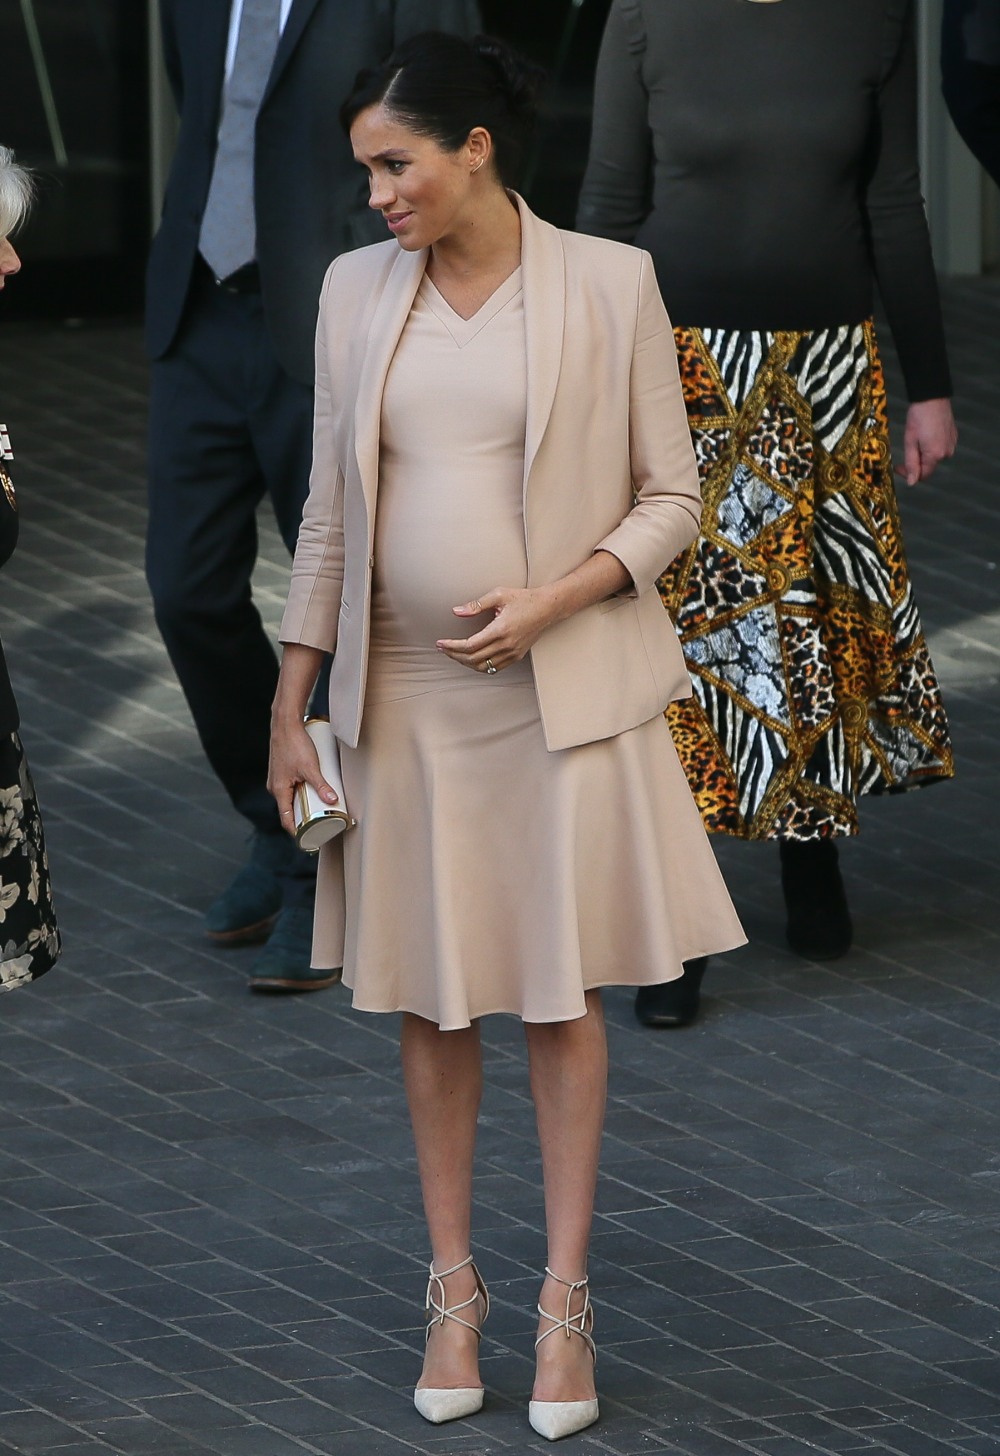 Pregnant Duchess of Sussex Meghan visiting the National Theatre for the first time as the theatre new Royal Patron - London